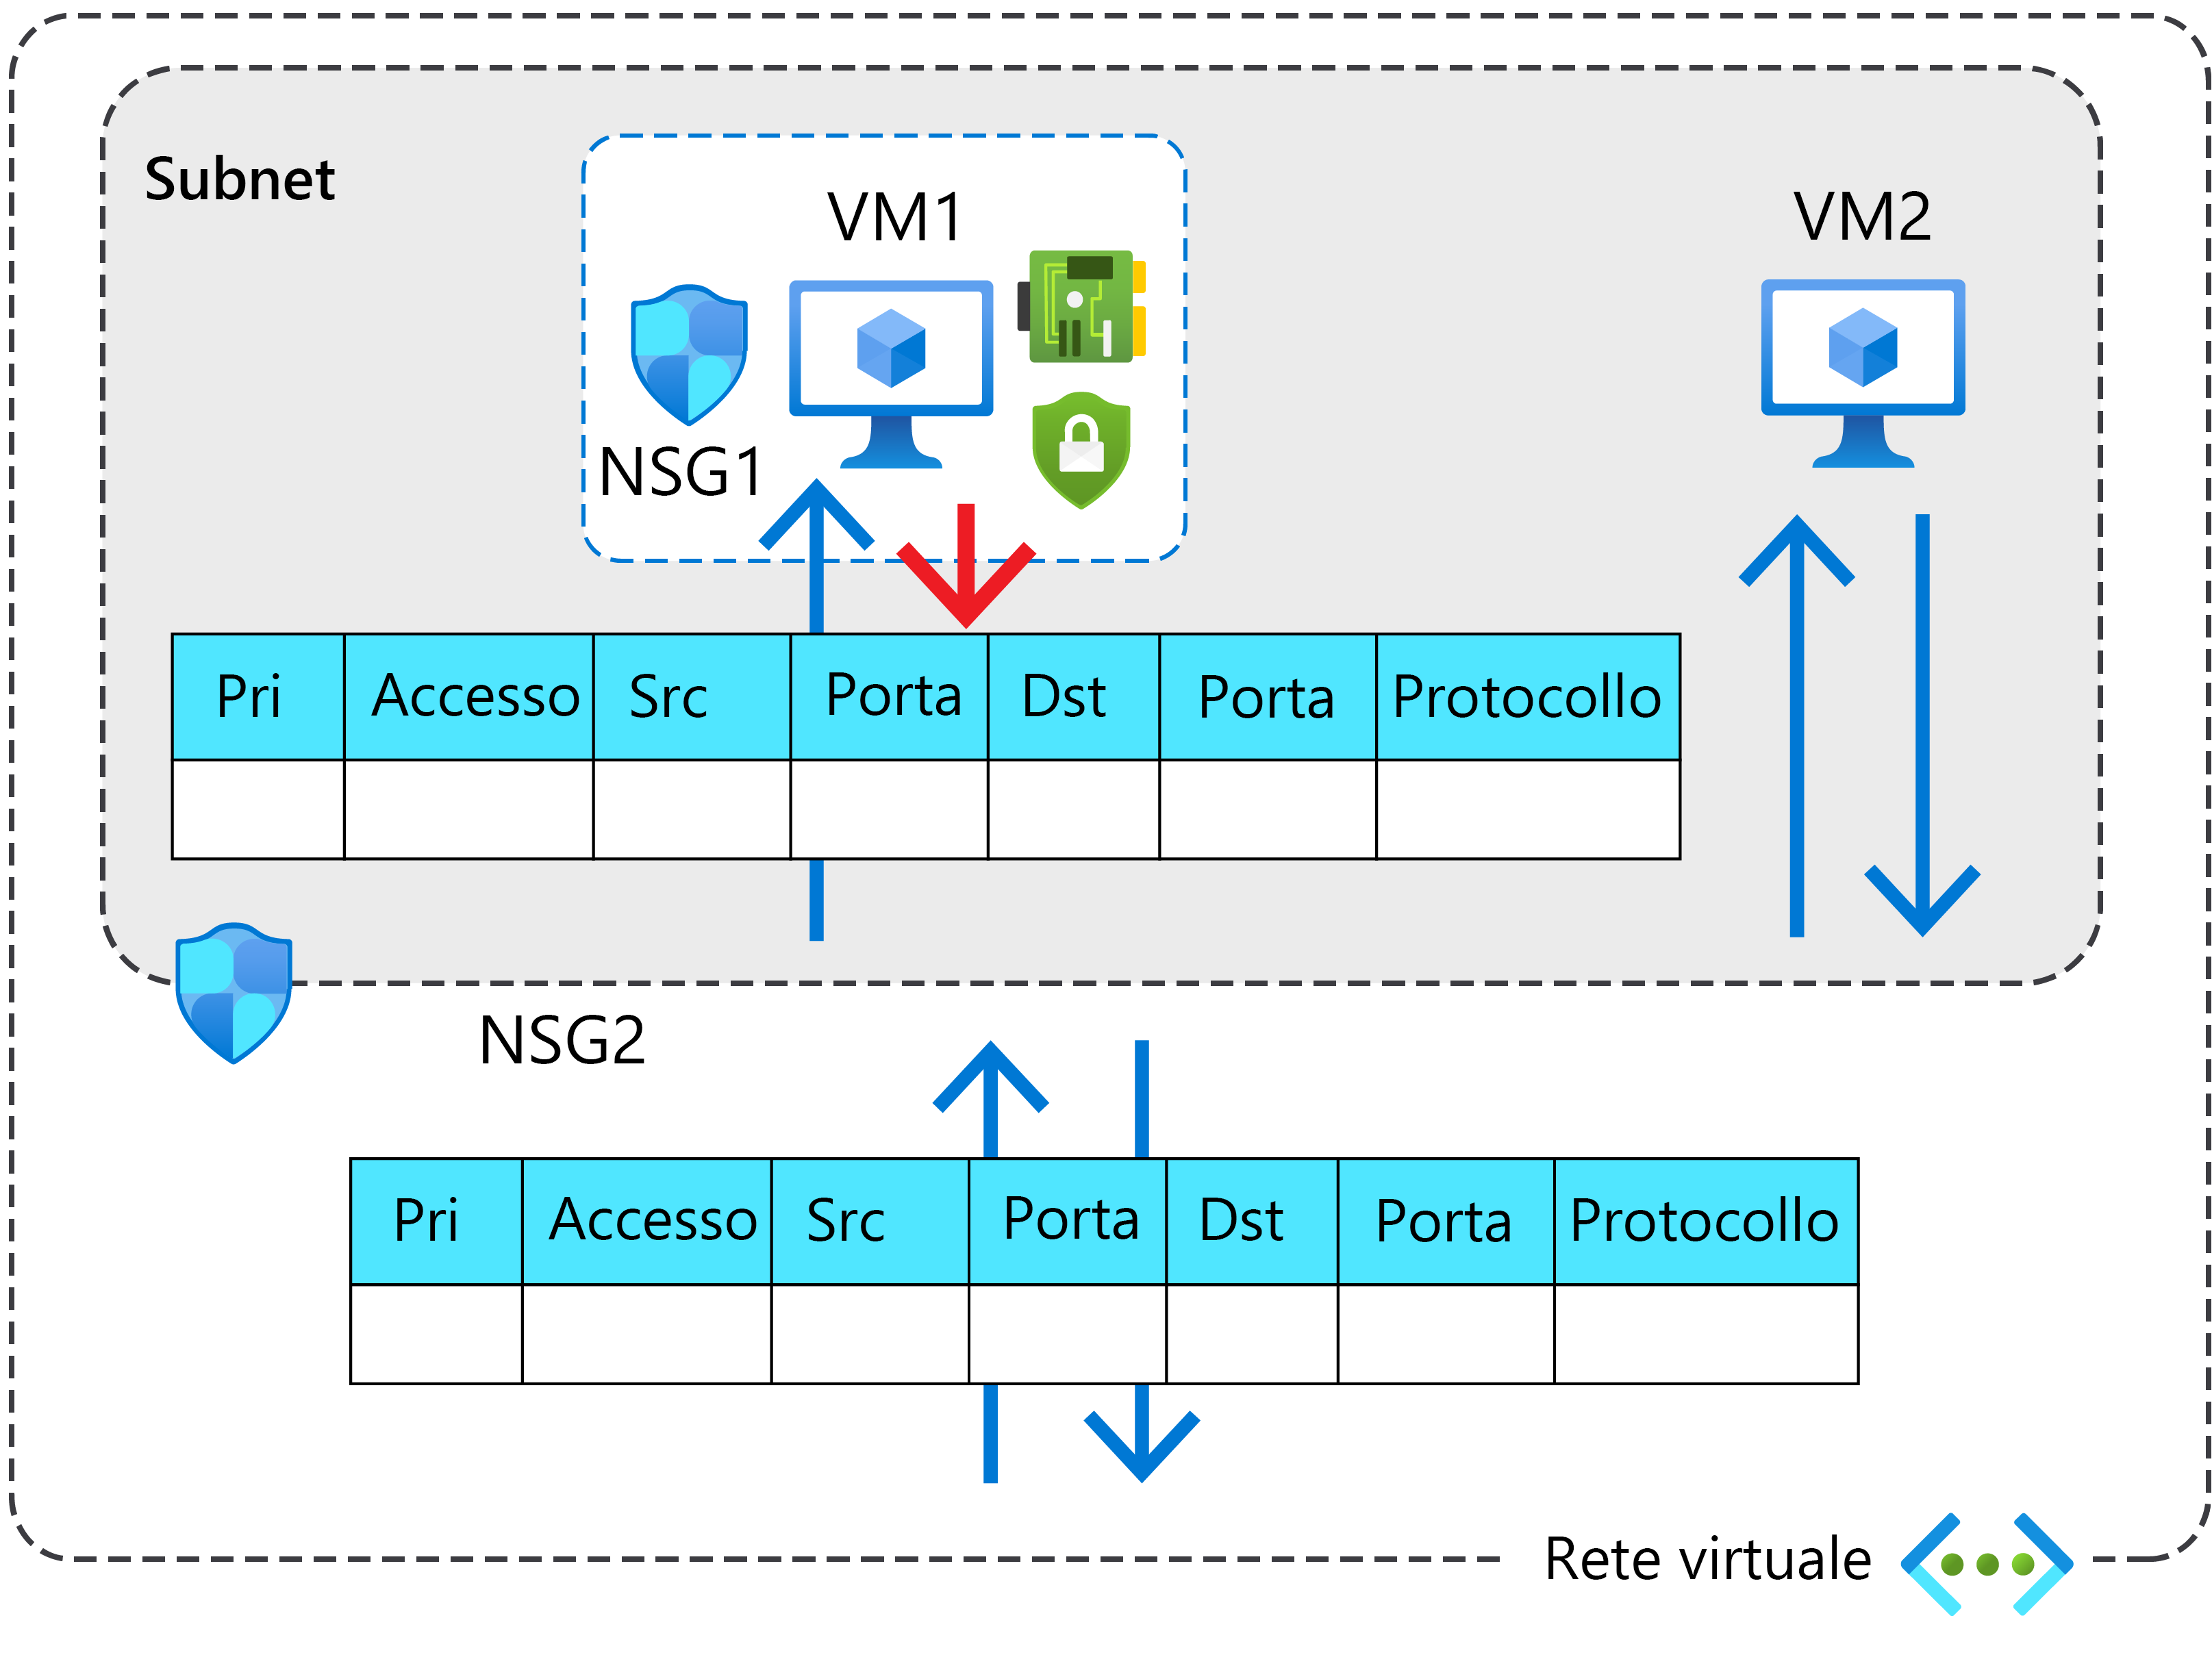 A graphic depicts a subnet object that contains two VMs, VM1 and VM2. VM1 is protected through the assignment of an NSG called NSG1. The entire subnet is protected by an NSG called NSG2.